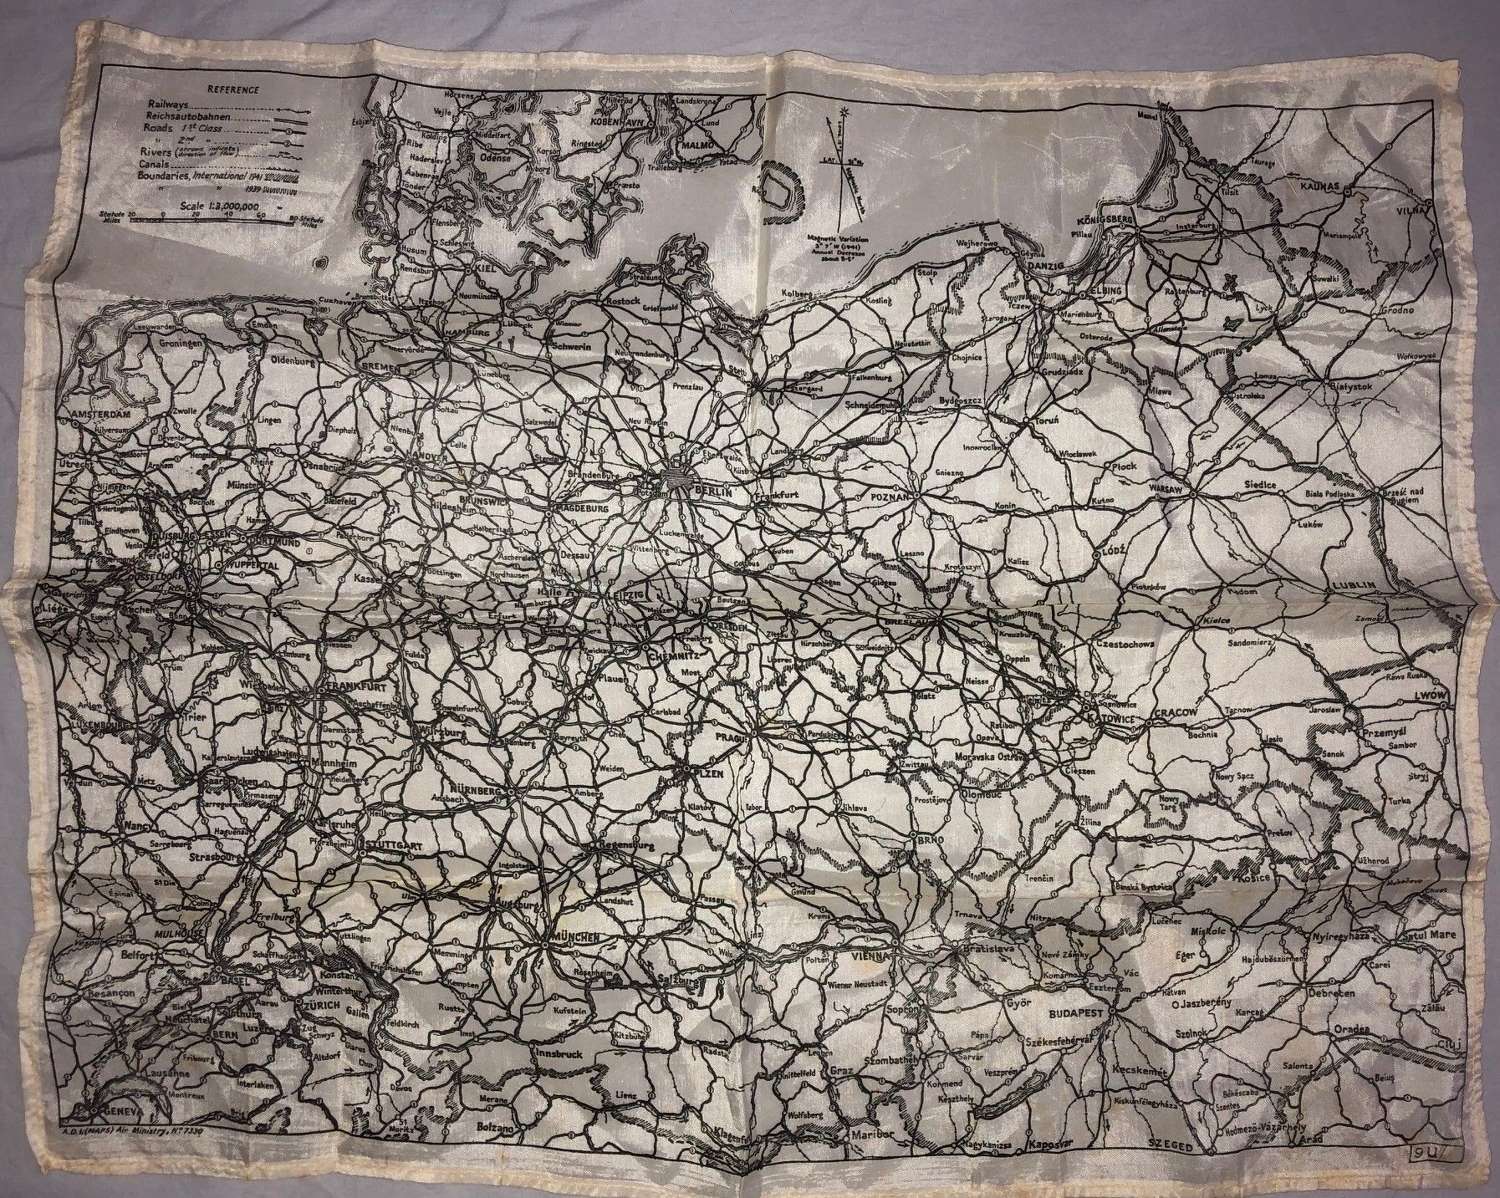 A 1943 PERIOD RAF ESCAPE MAP OF GERMANY